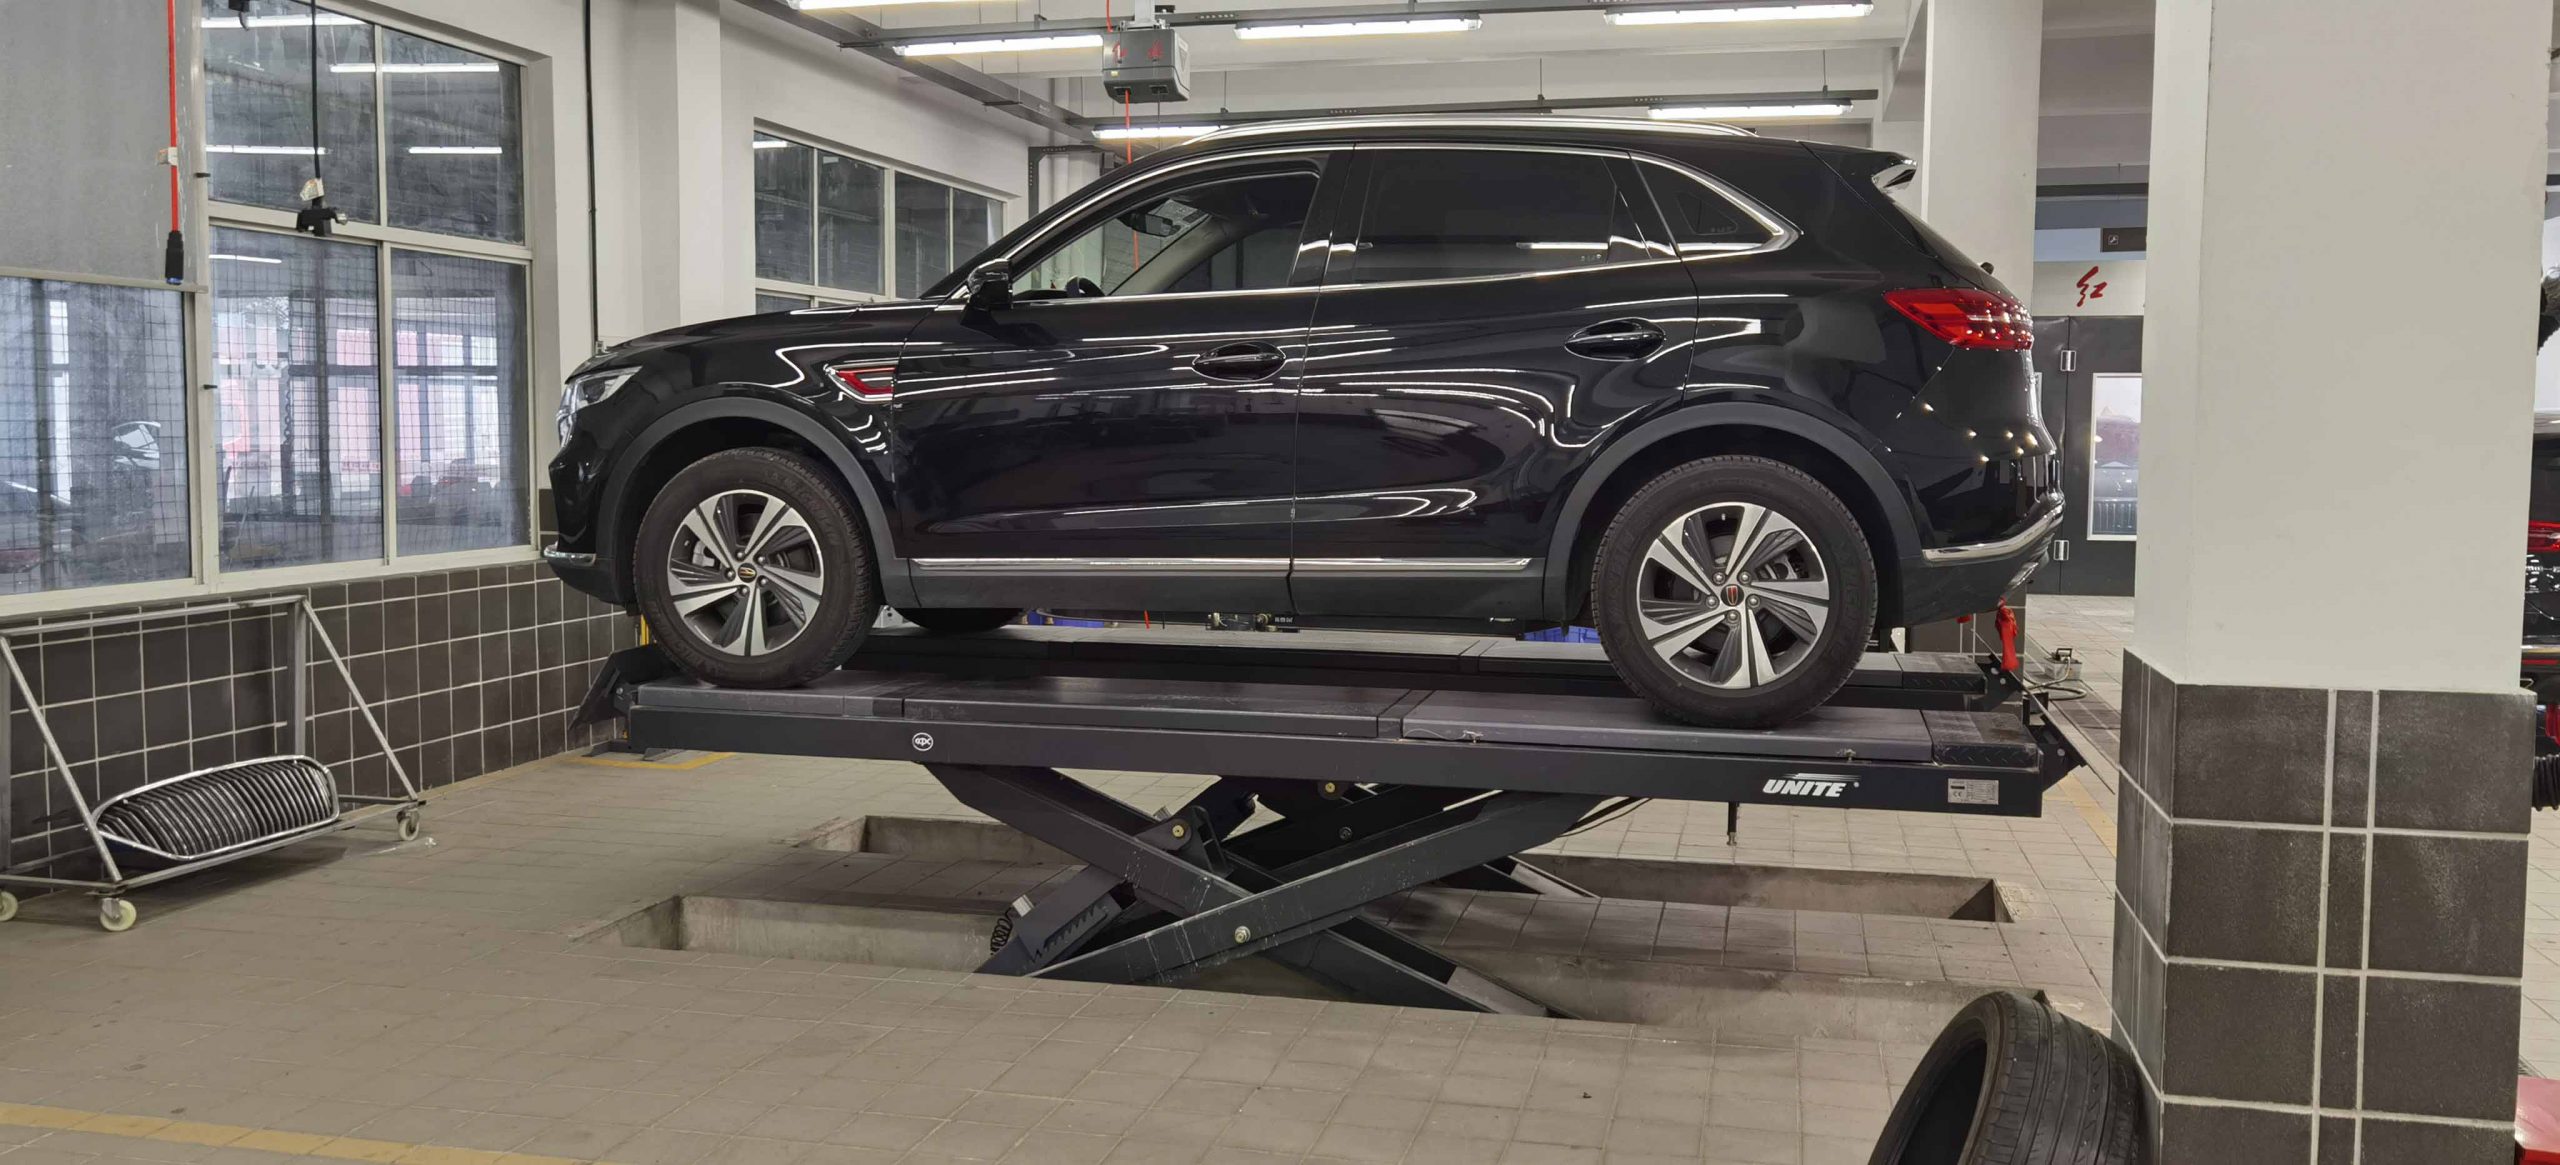 5 Signs You Need a Home Garage Car Lift